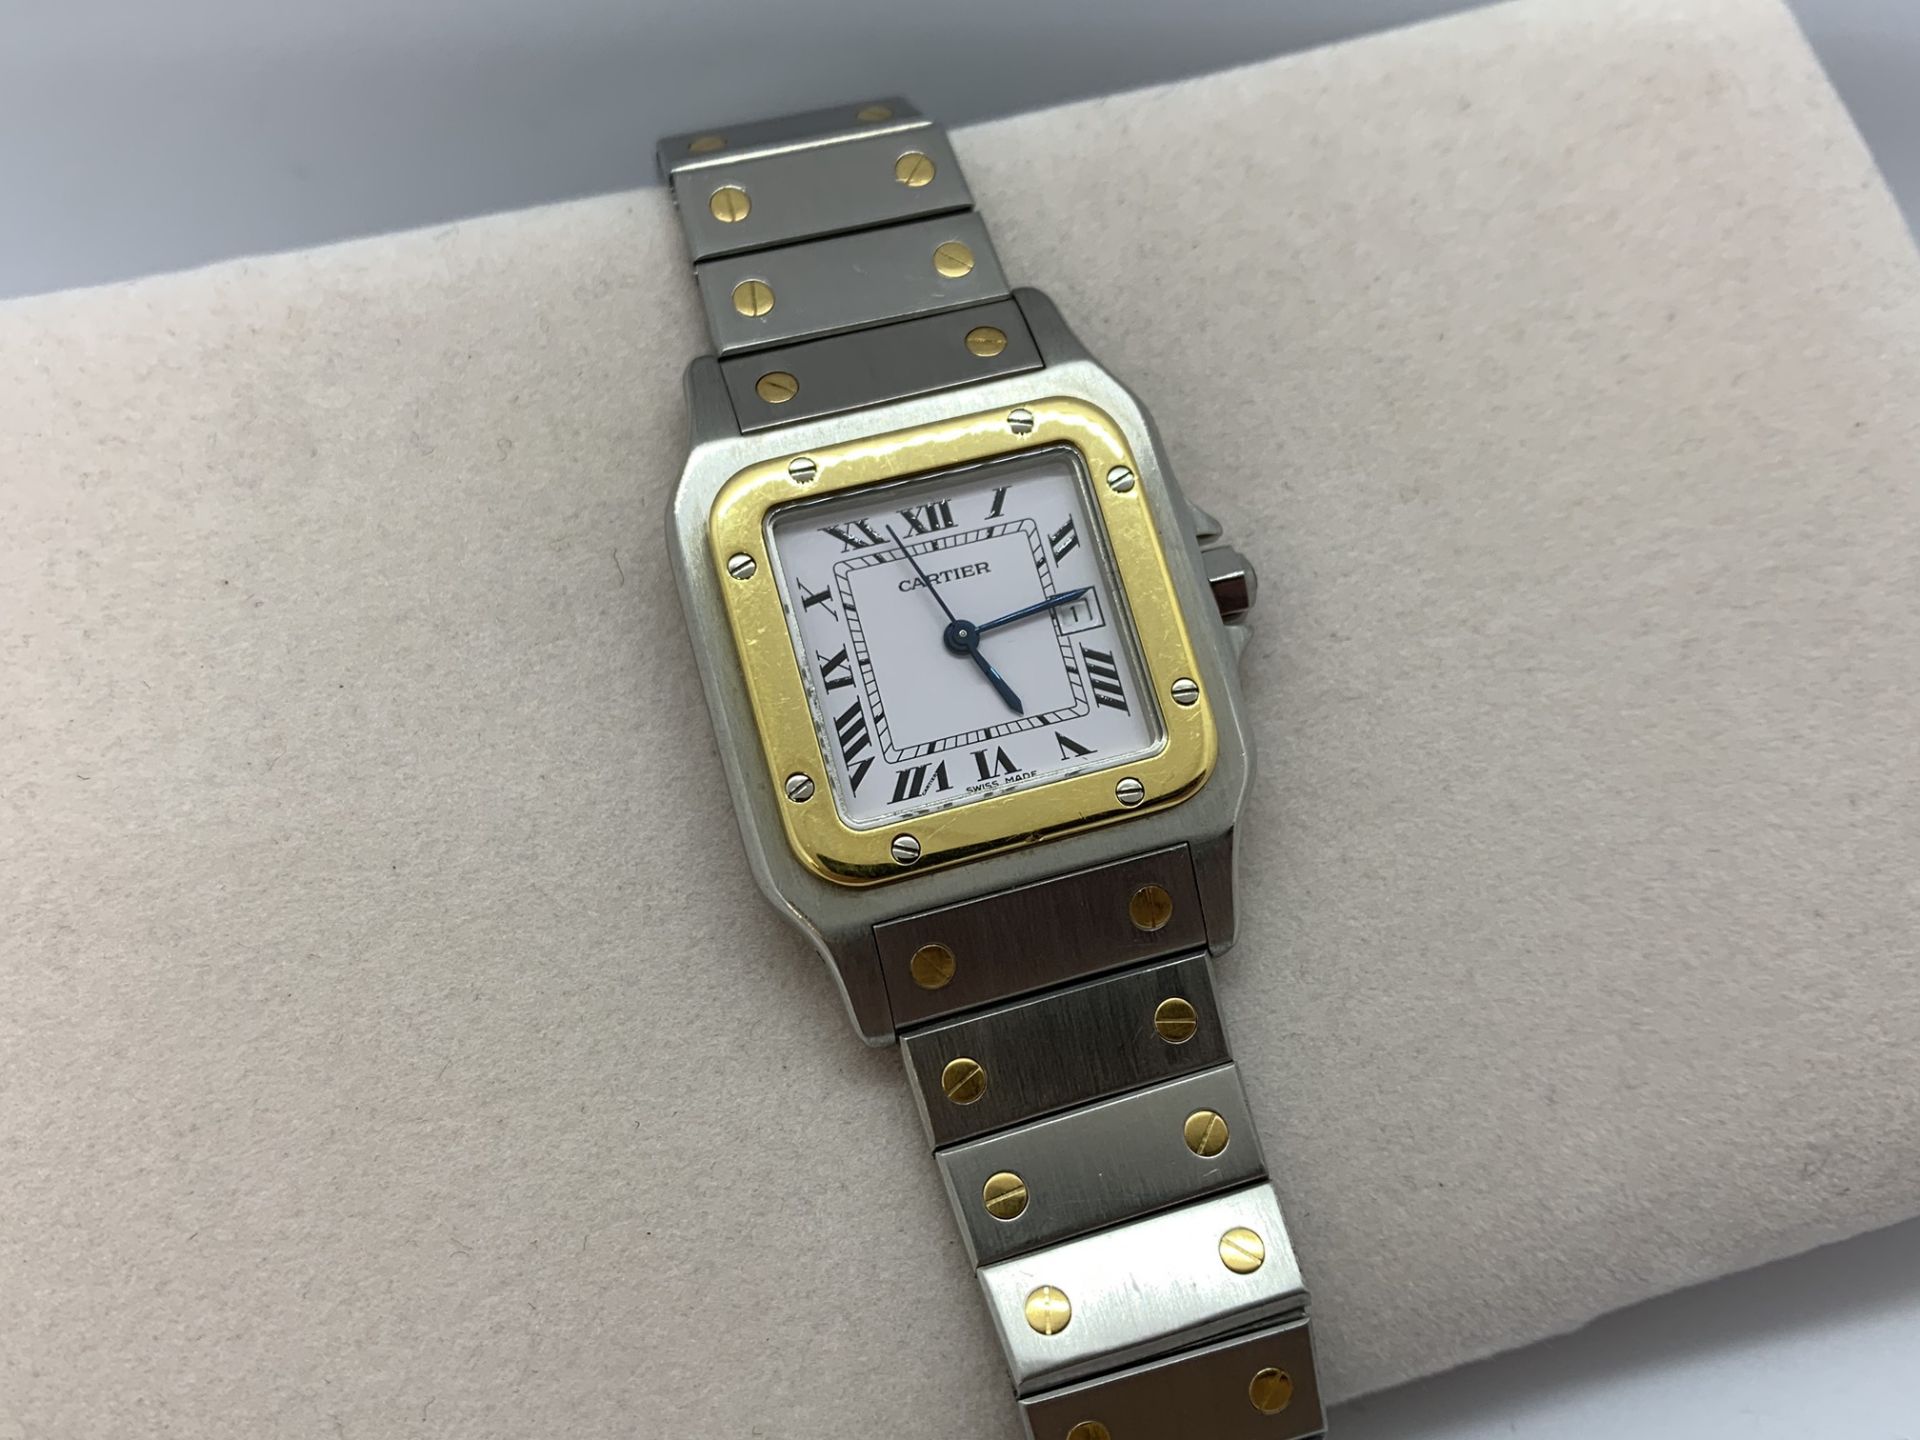 CARTIER SANTOS S/S & GOLD AUTOMATIC WATCH - Image 2 of 5